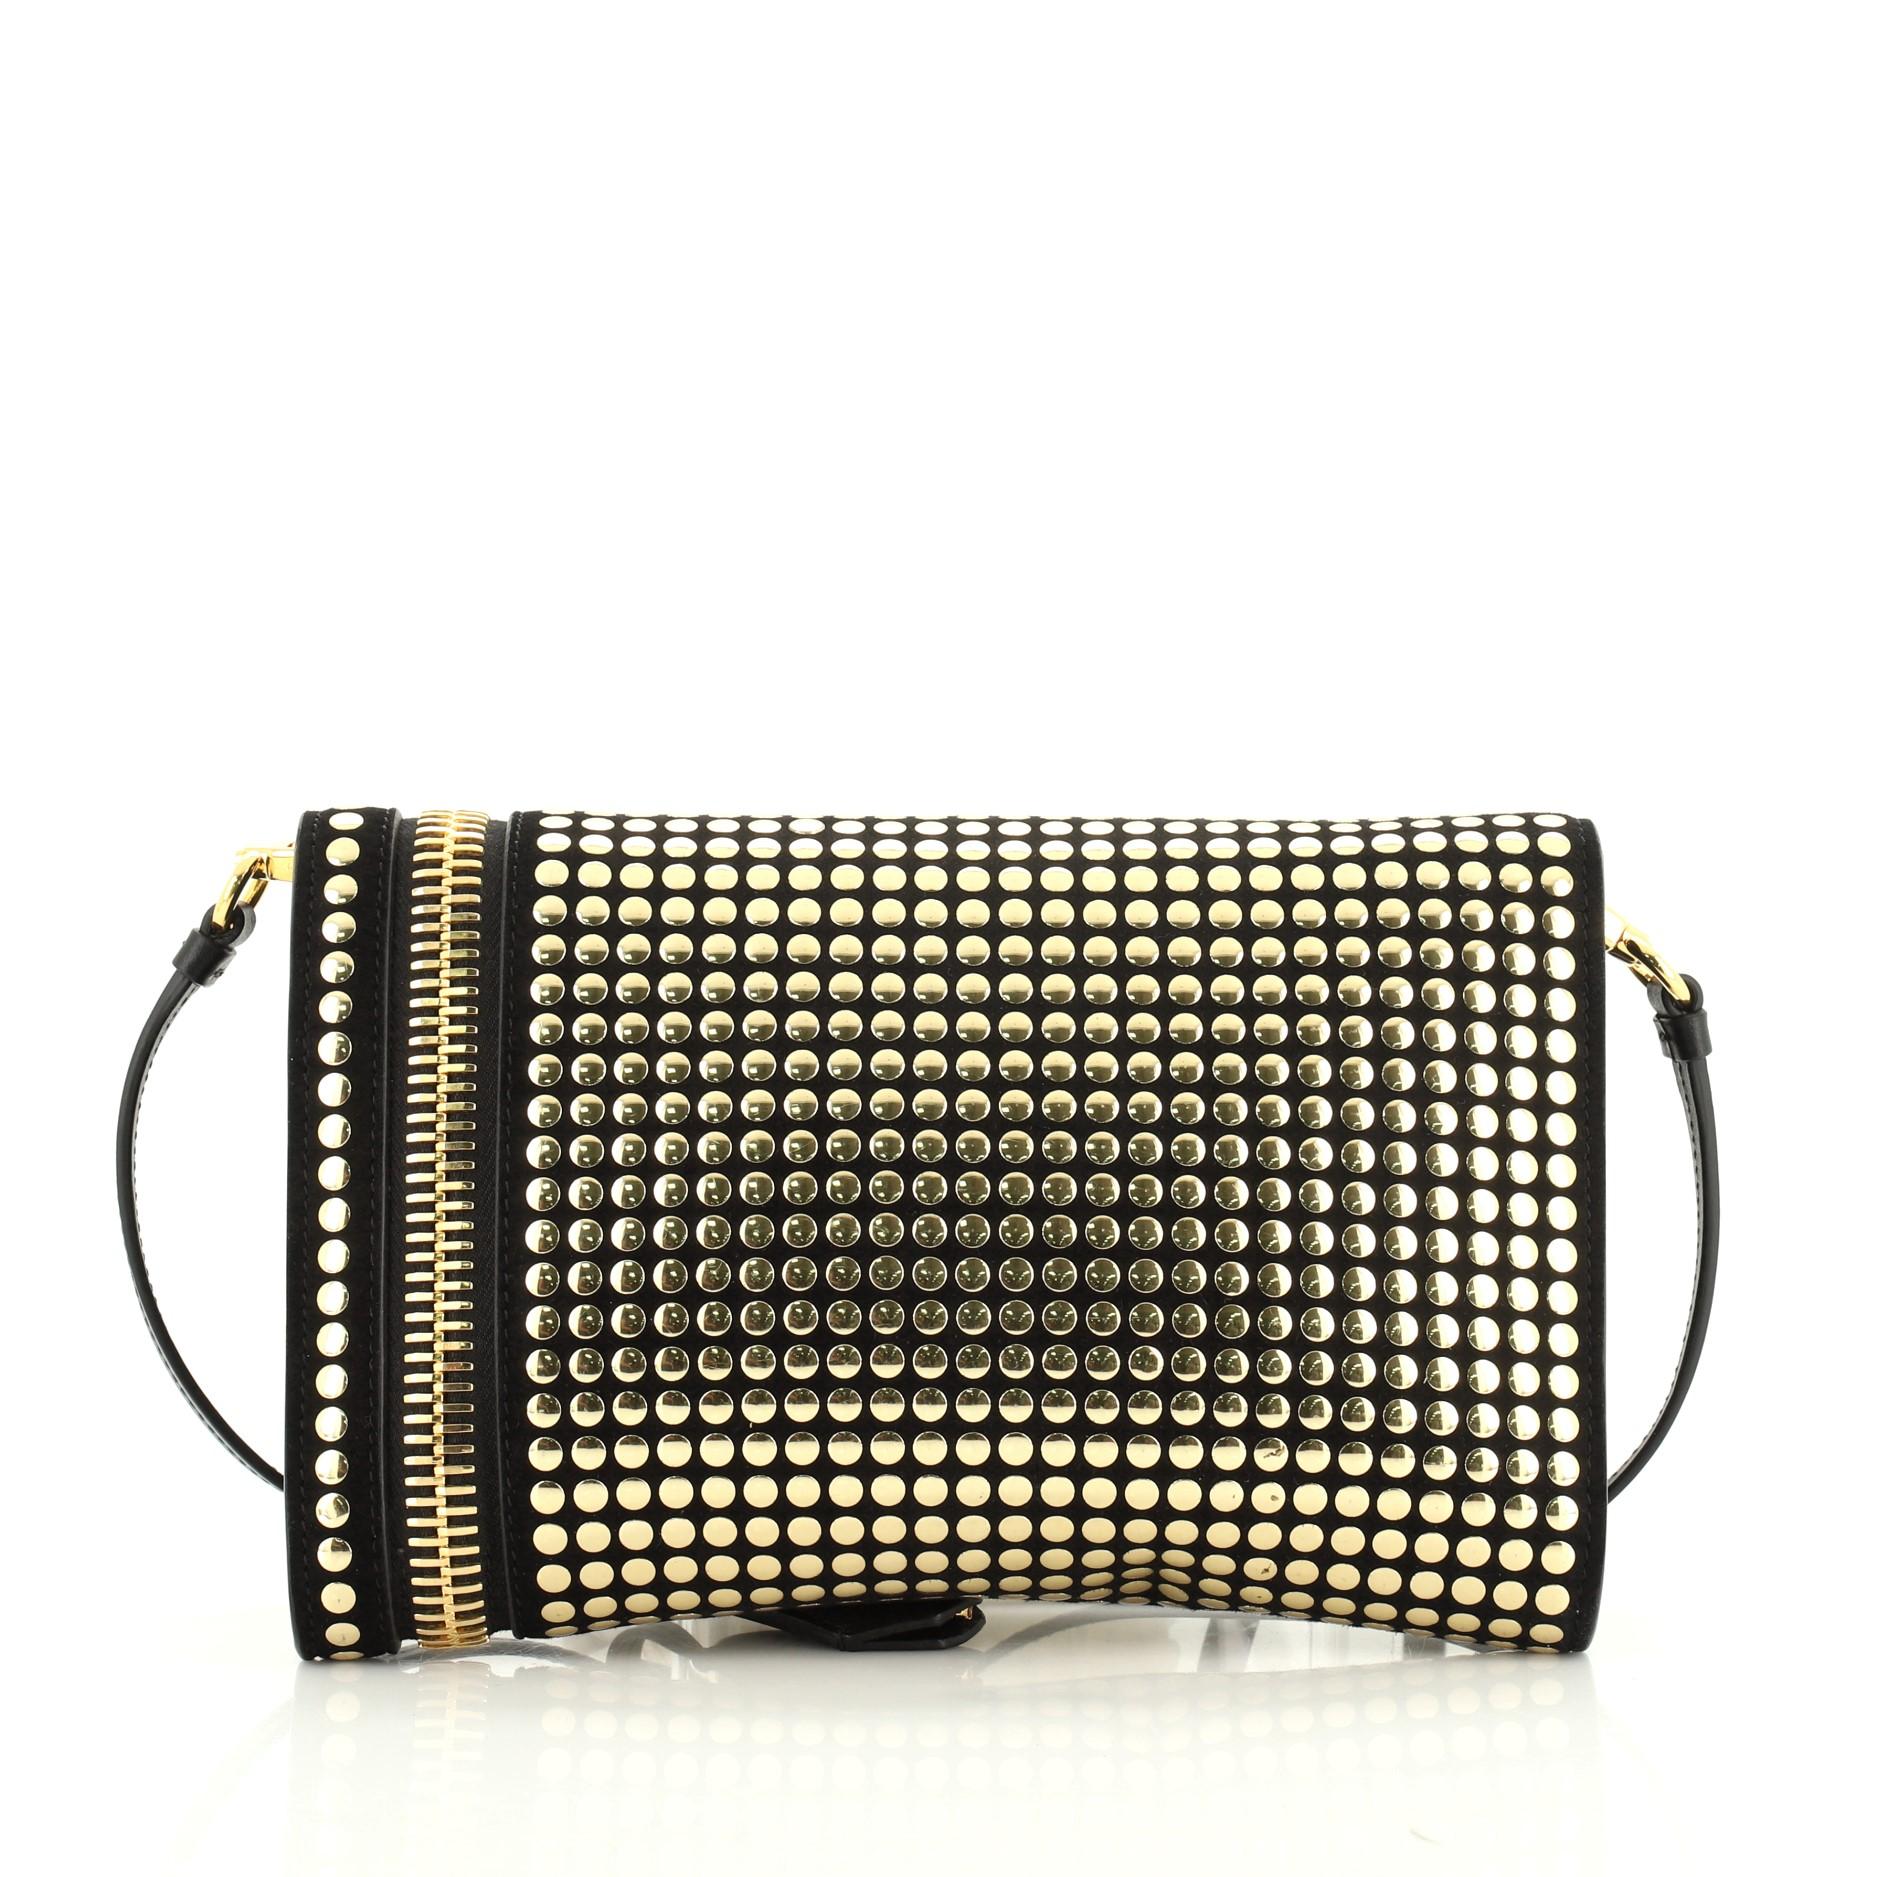 Black Tom Ford Alix Fold Over Crossbody Bag Studded Leather Small